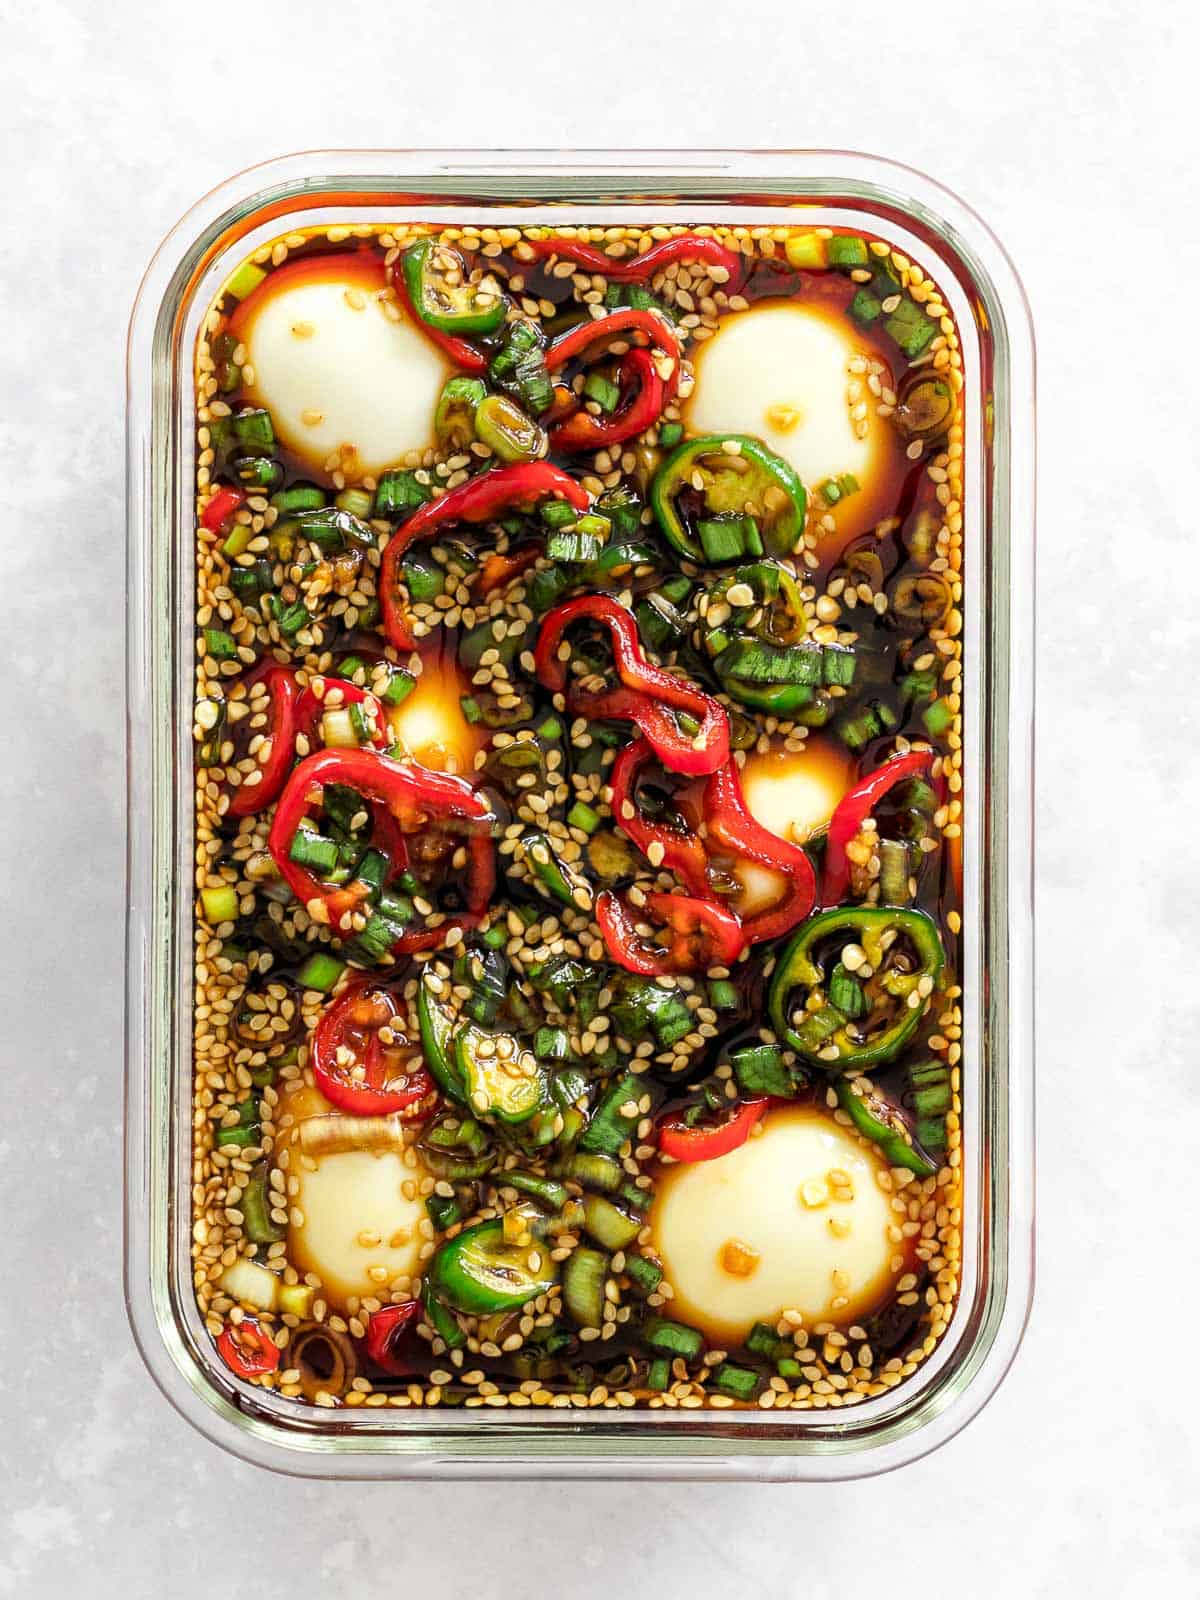 Mayak eggs in a soy marinade with red and green chili peppers and sesame seeds in a rectangular glass container.